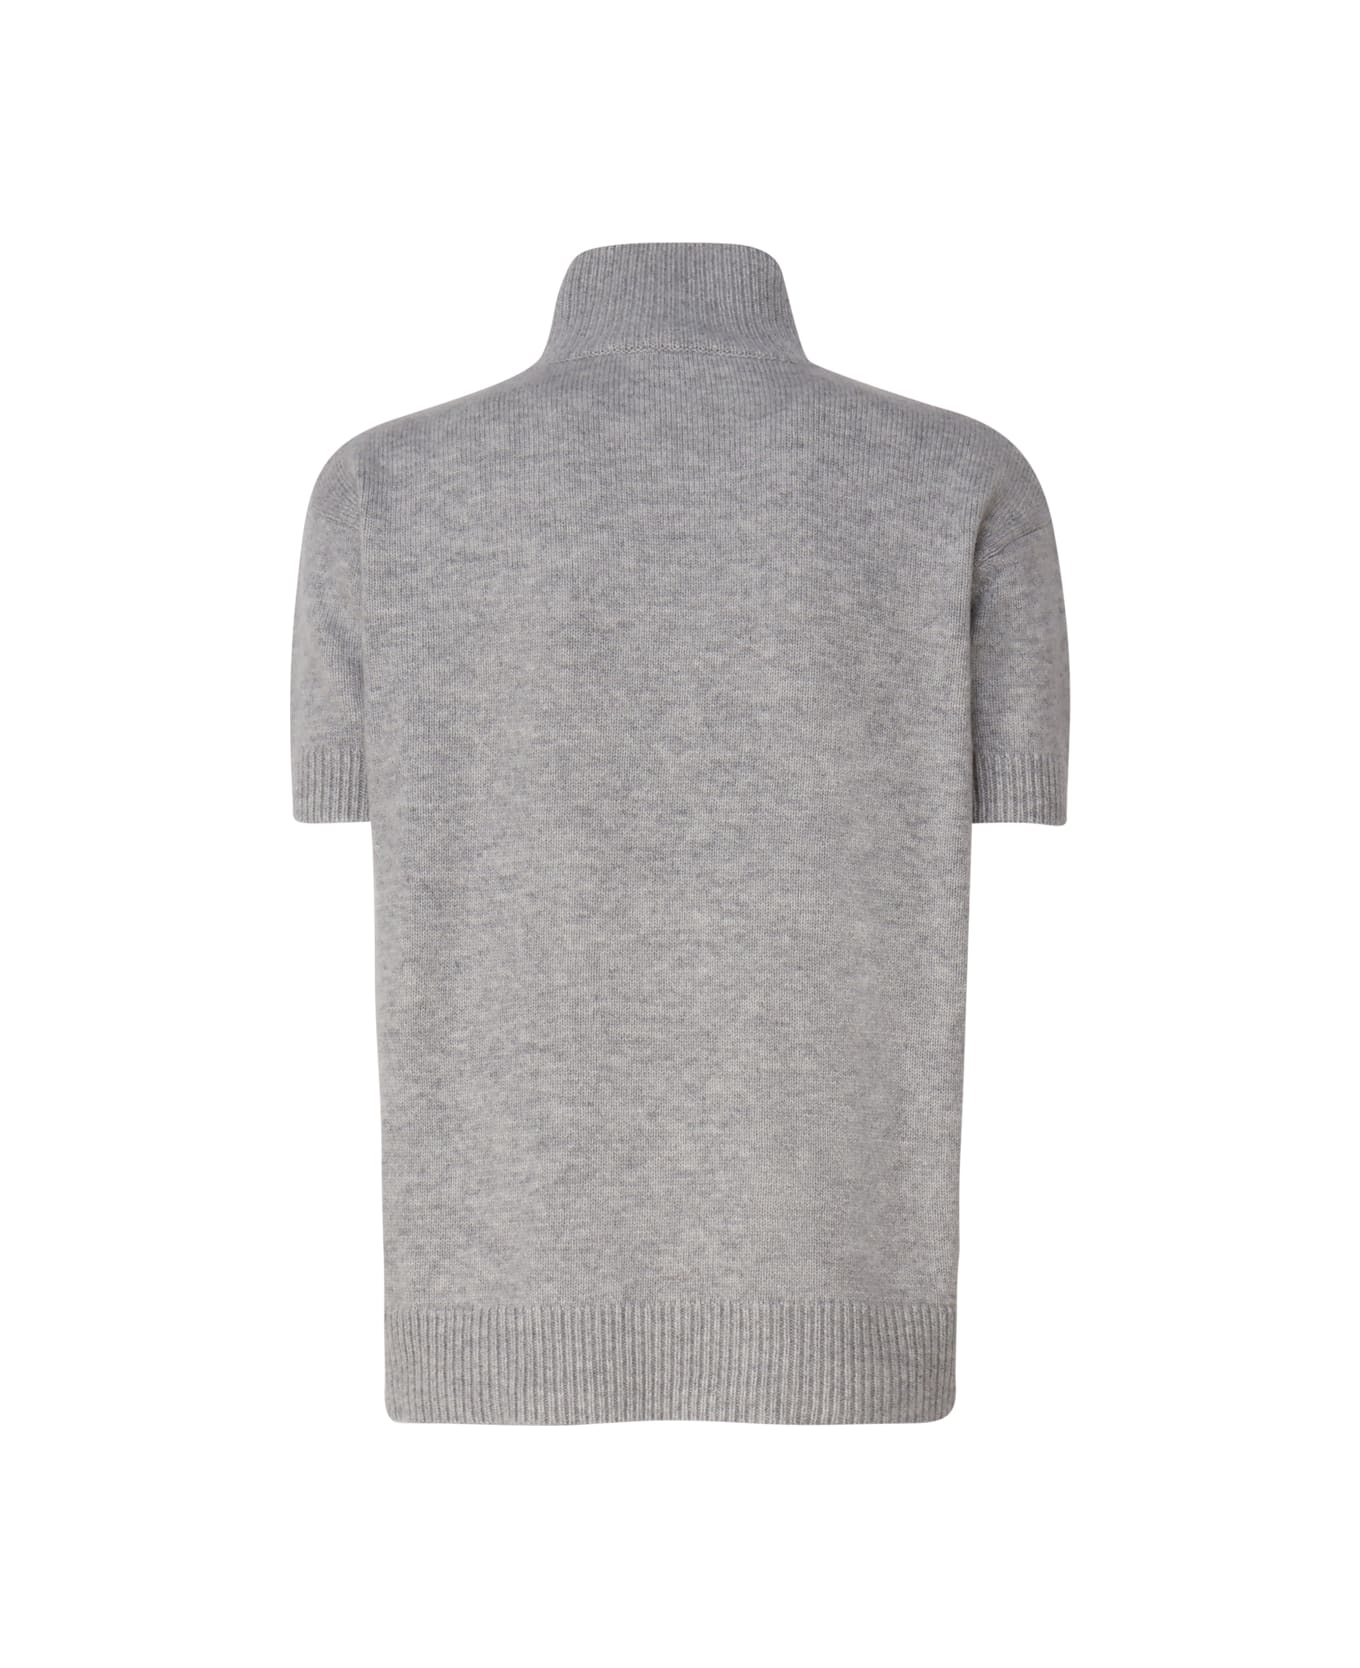 'S Max Mara Wool And Cashmere Turtleneck - Grey